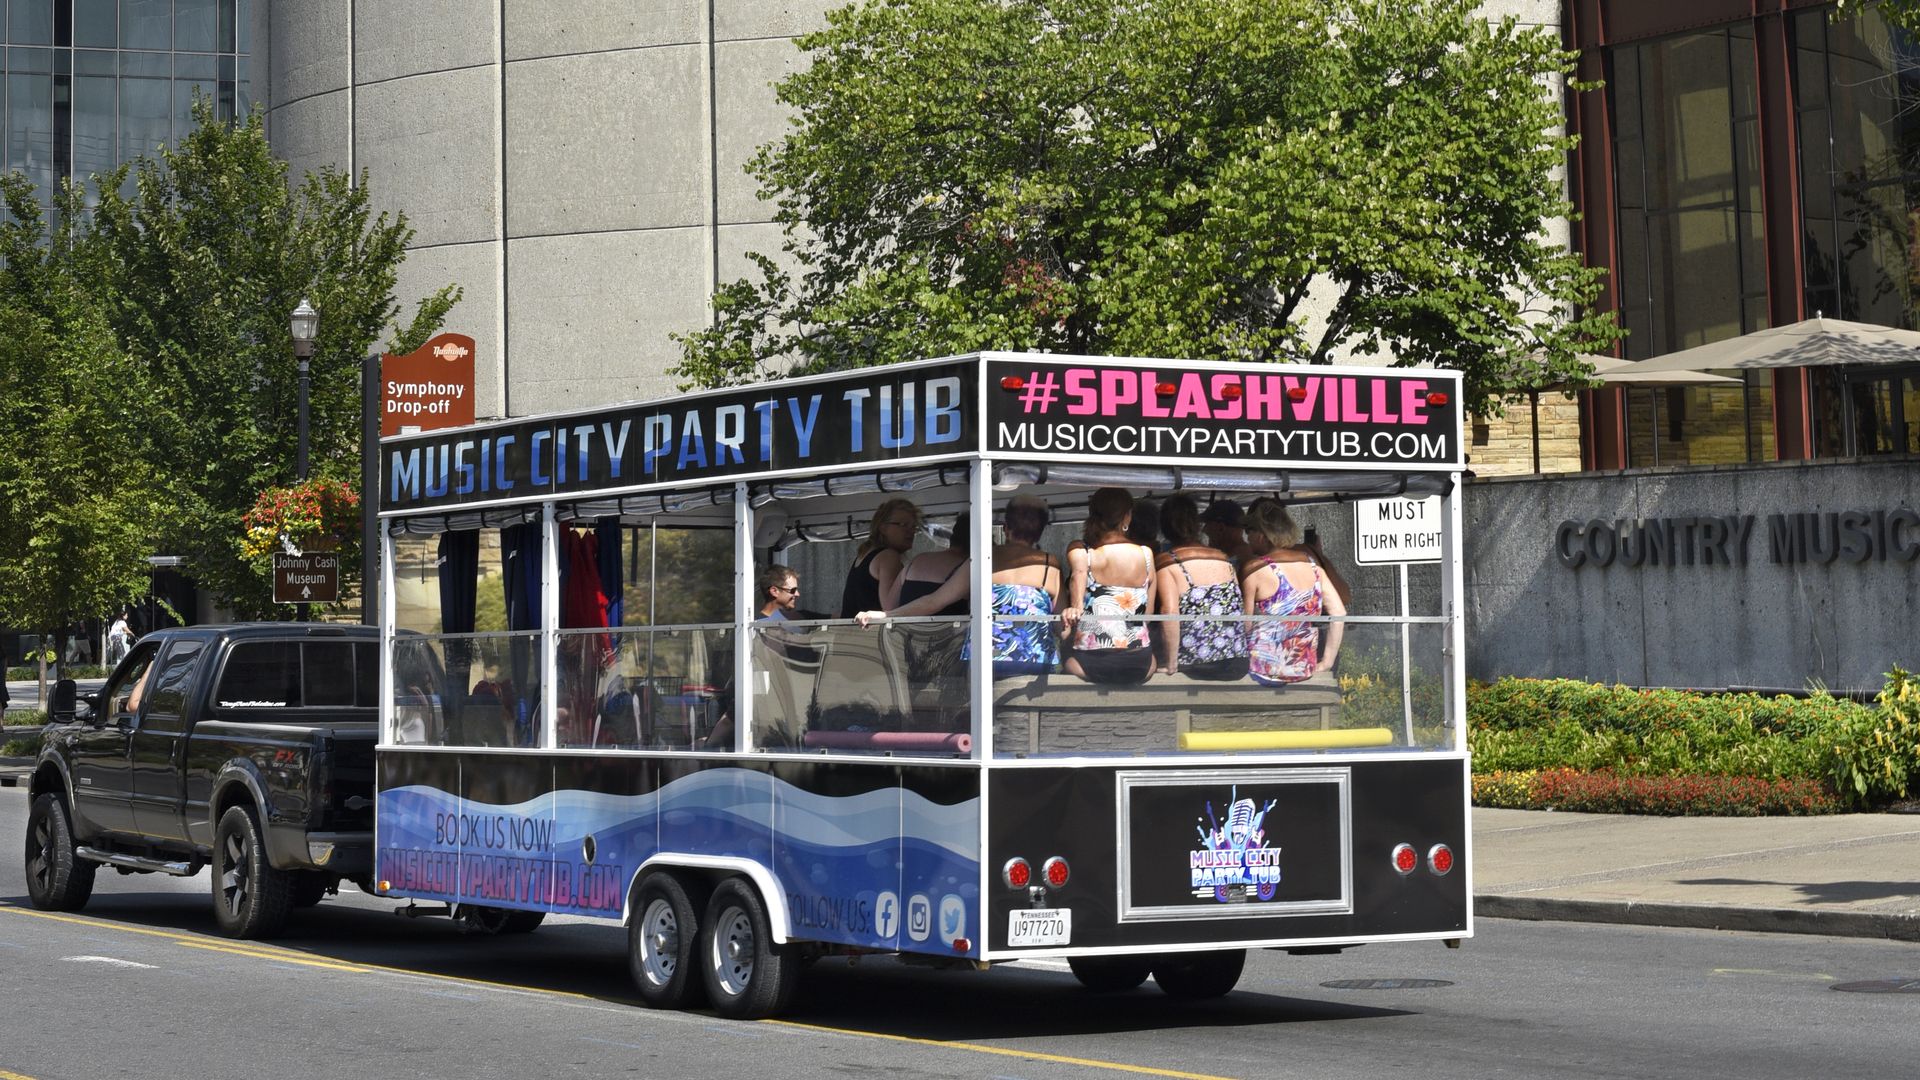 A hot tub party bus in downtown Nashville